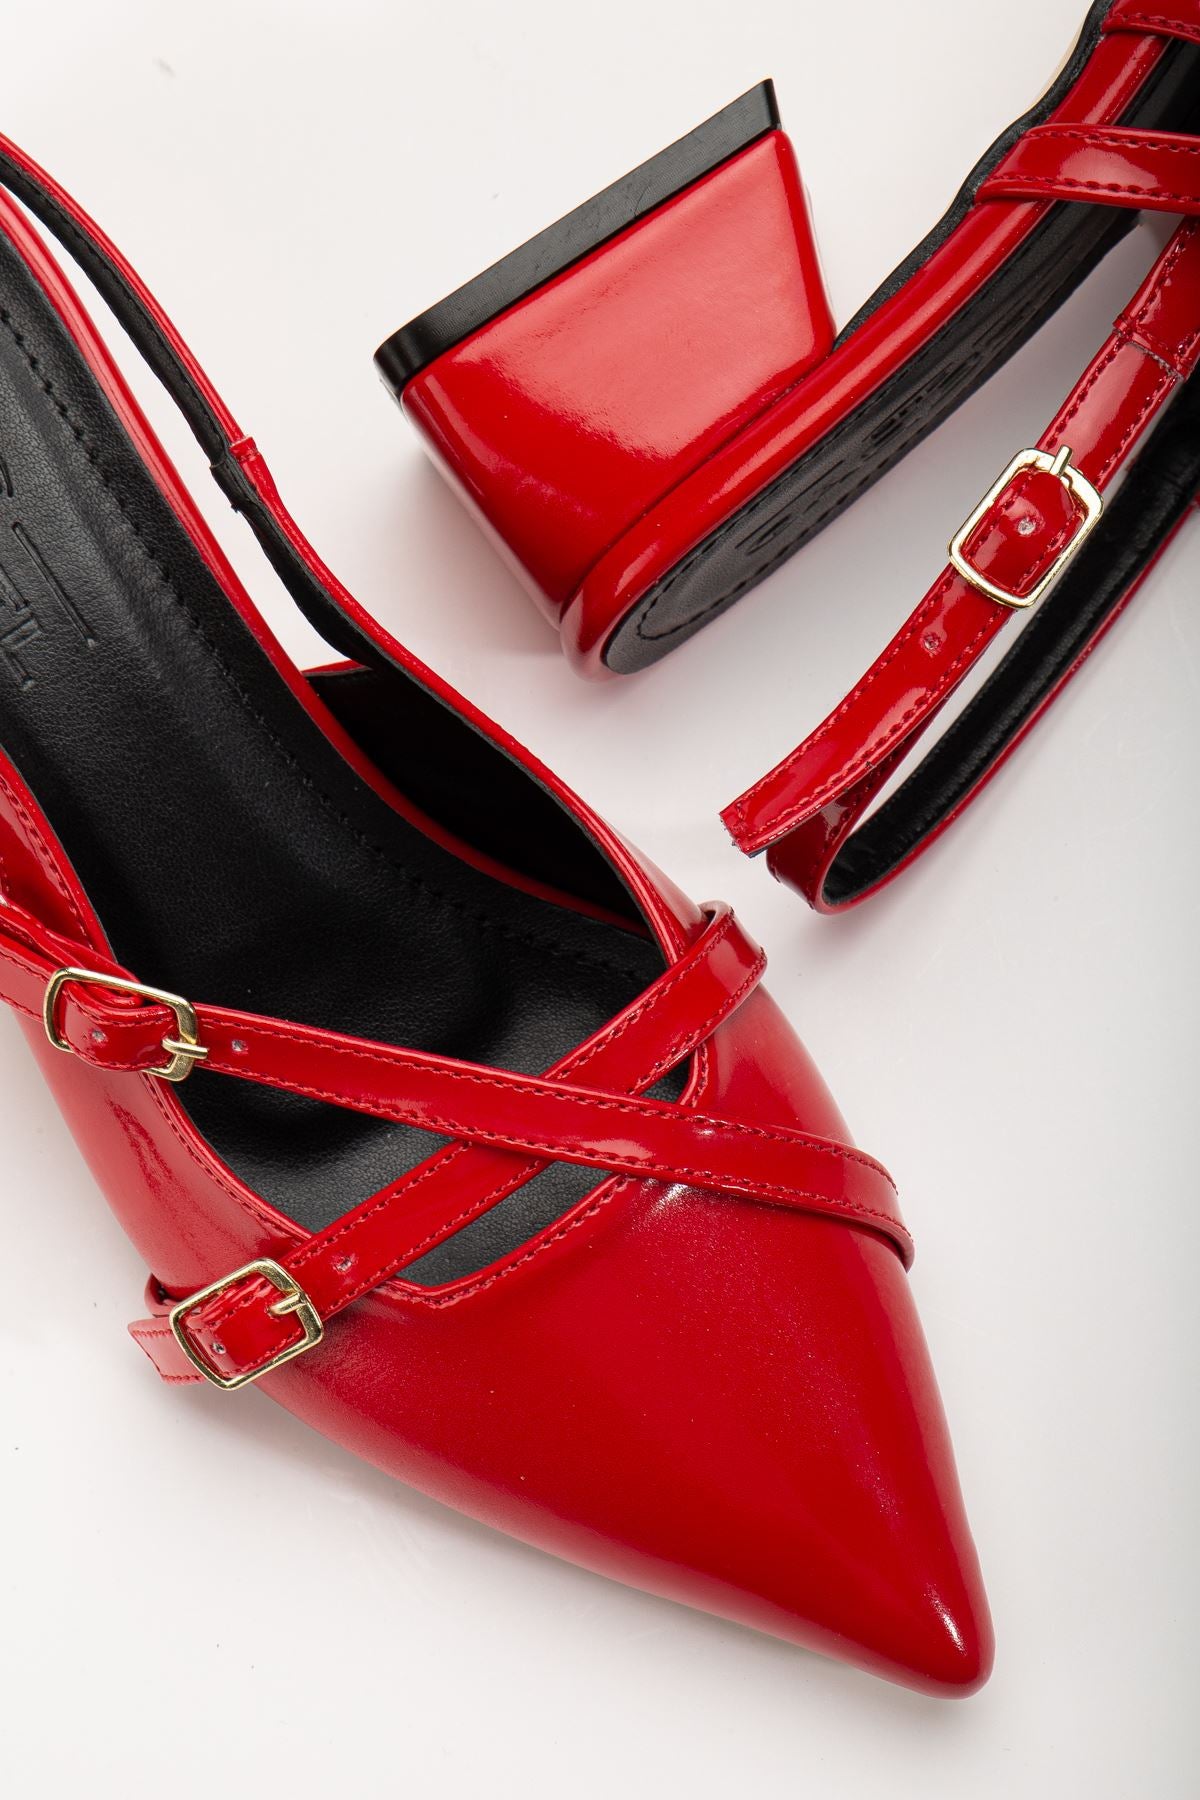 Pary Red Patent Leather Women's Heeled Shoes - STREETMODE™